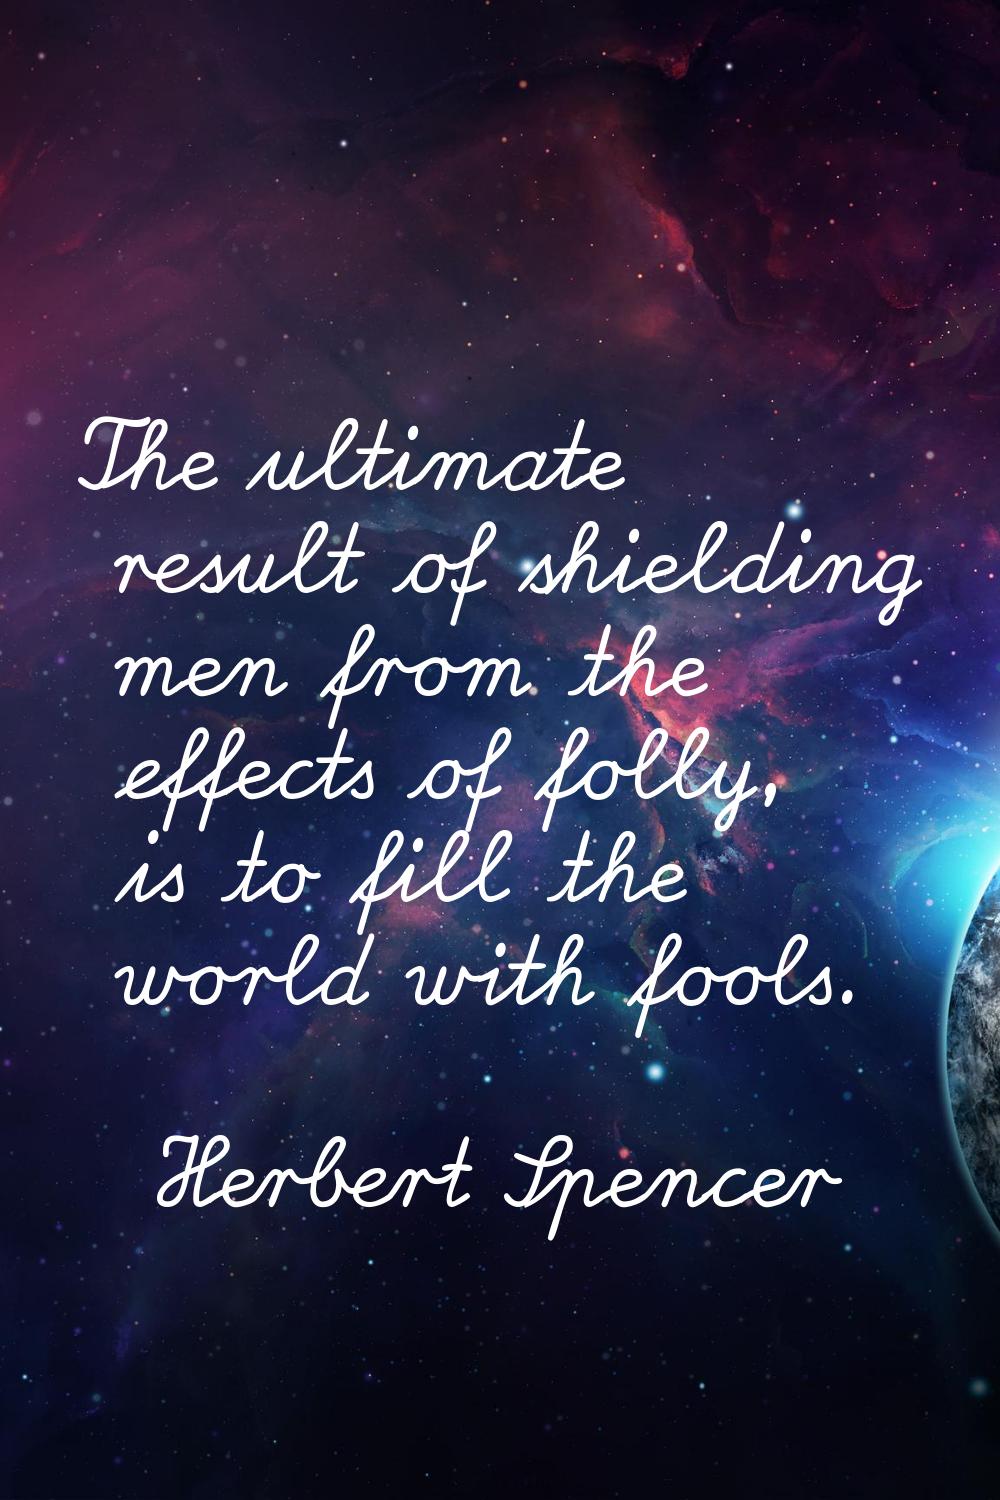 The ultimate result of shielding men from the effects of folly, is to fill the world with fools.